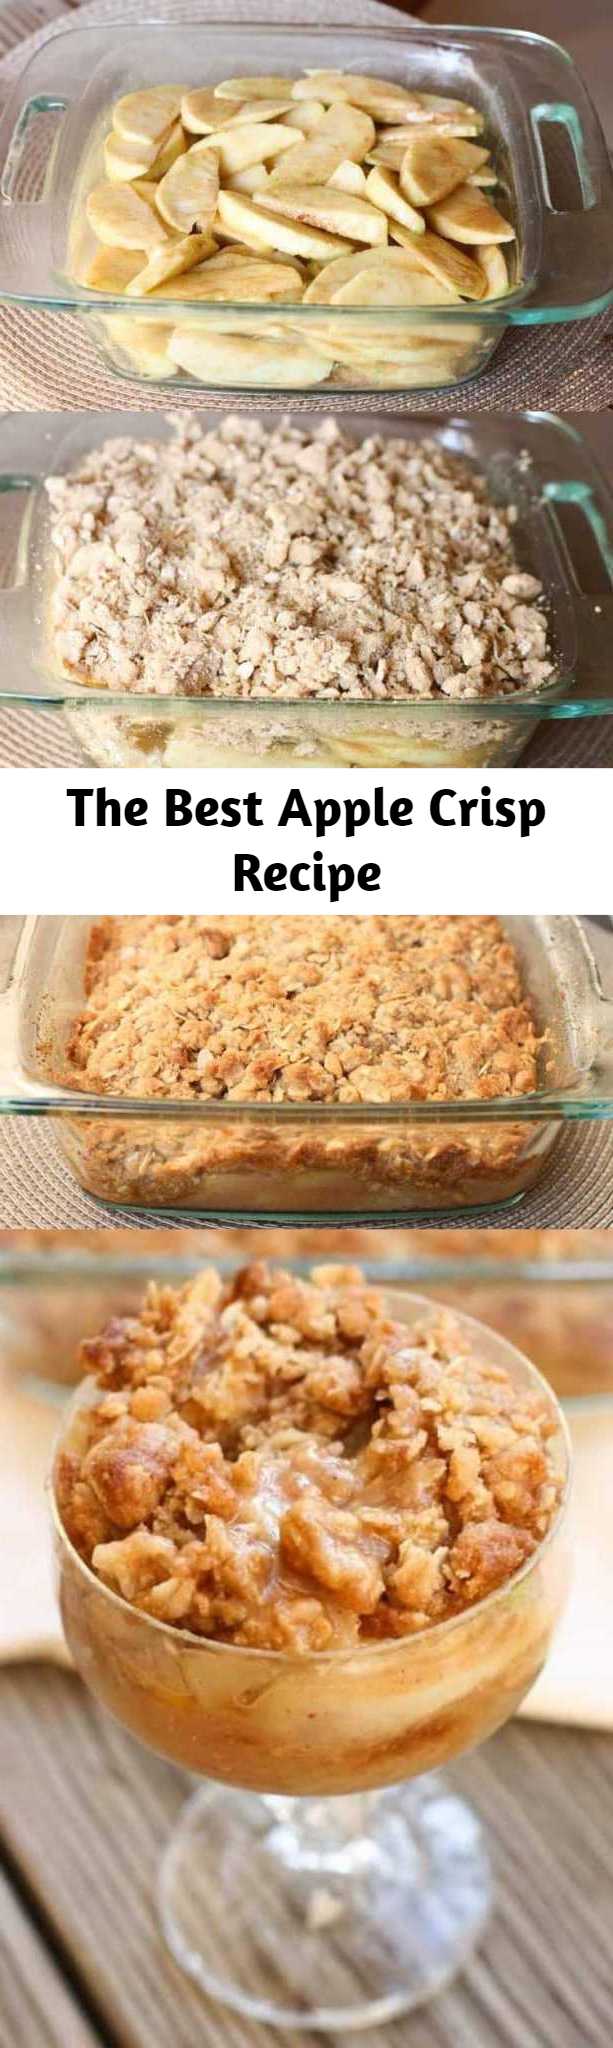 The Best Apple Crisp Recipe - Thinly sliced Granny Smith apples baked with a cinnamon glaze and oatmeal crumb topping. The BEST Apple Crisp recipe Ever!